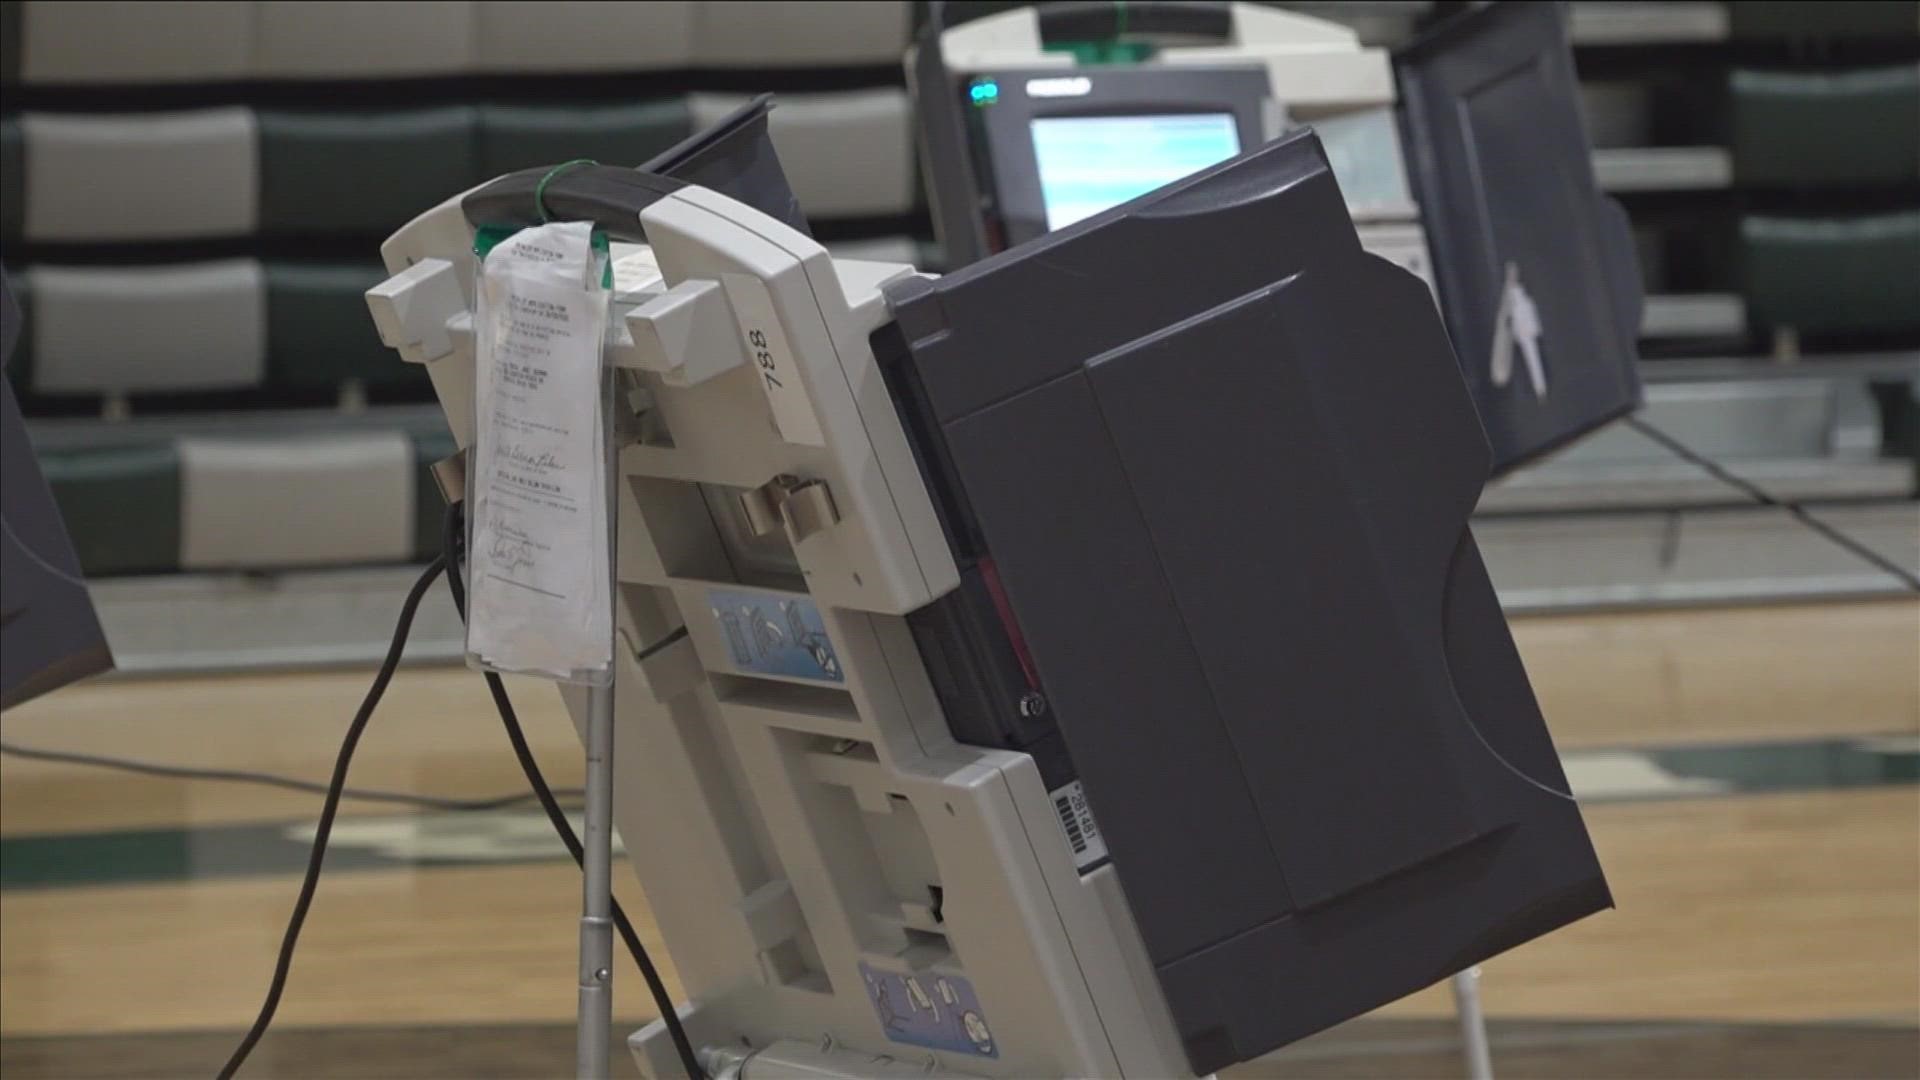 Election officials said they desperately need the equipment because the current voting machines are 25 years old and can't be fixed.